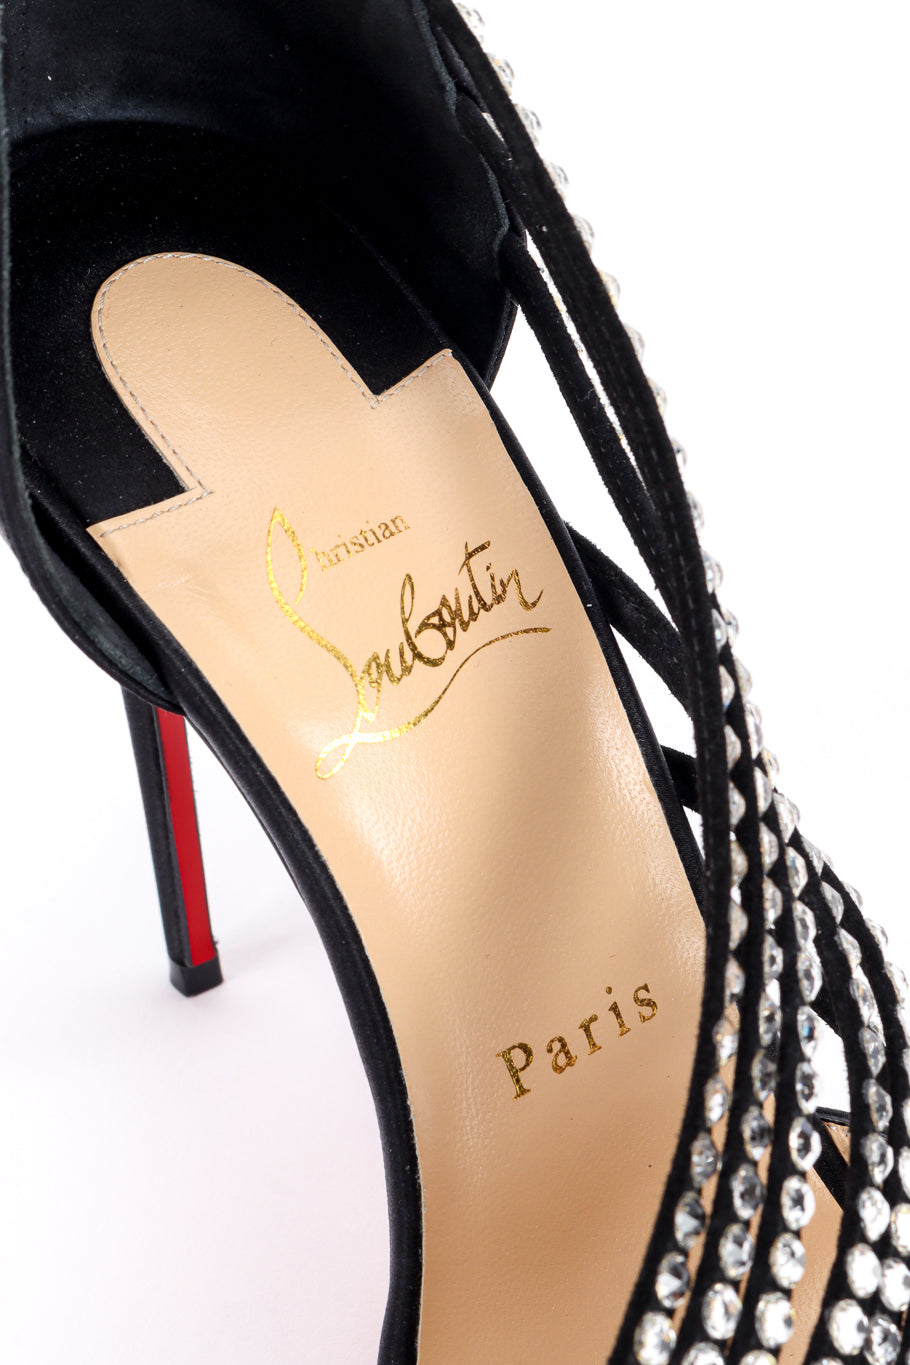 Christian Louboutin Crystal Strass Satin Pumps signed sole @recess la